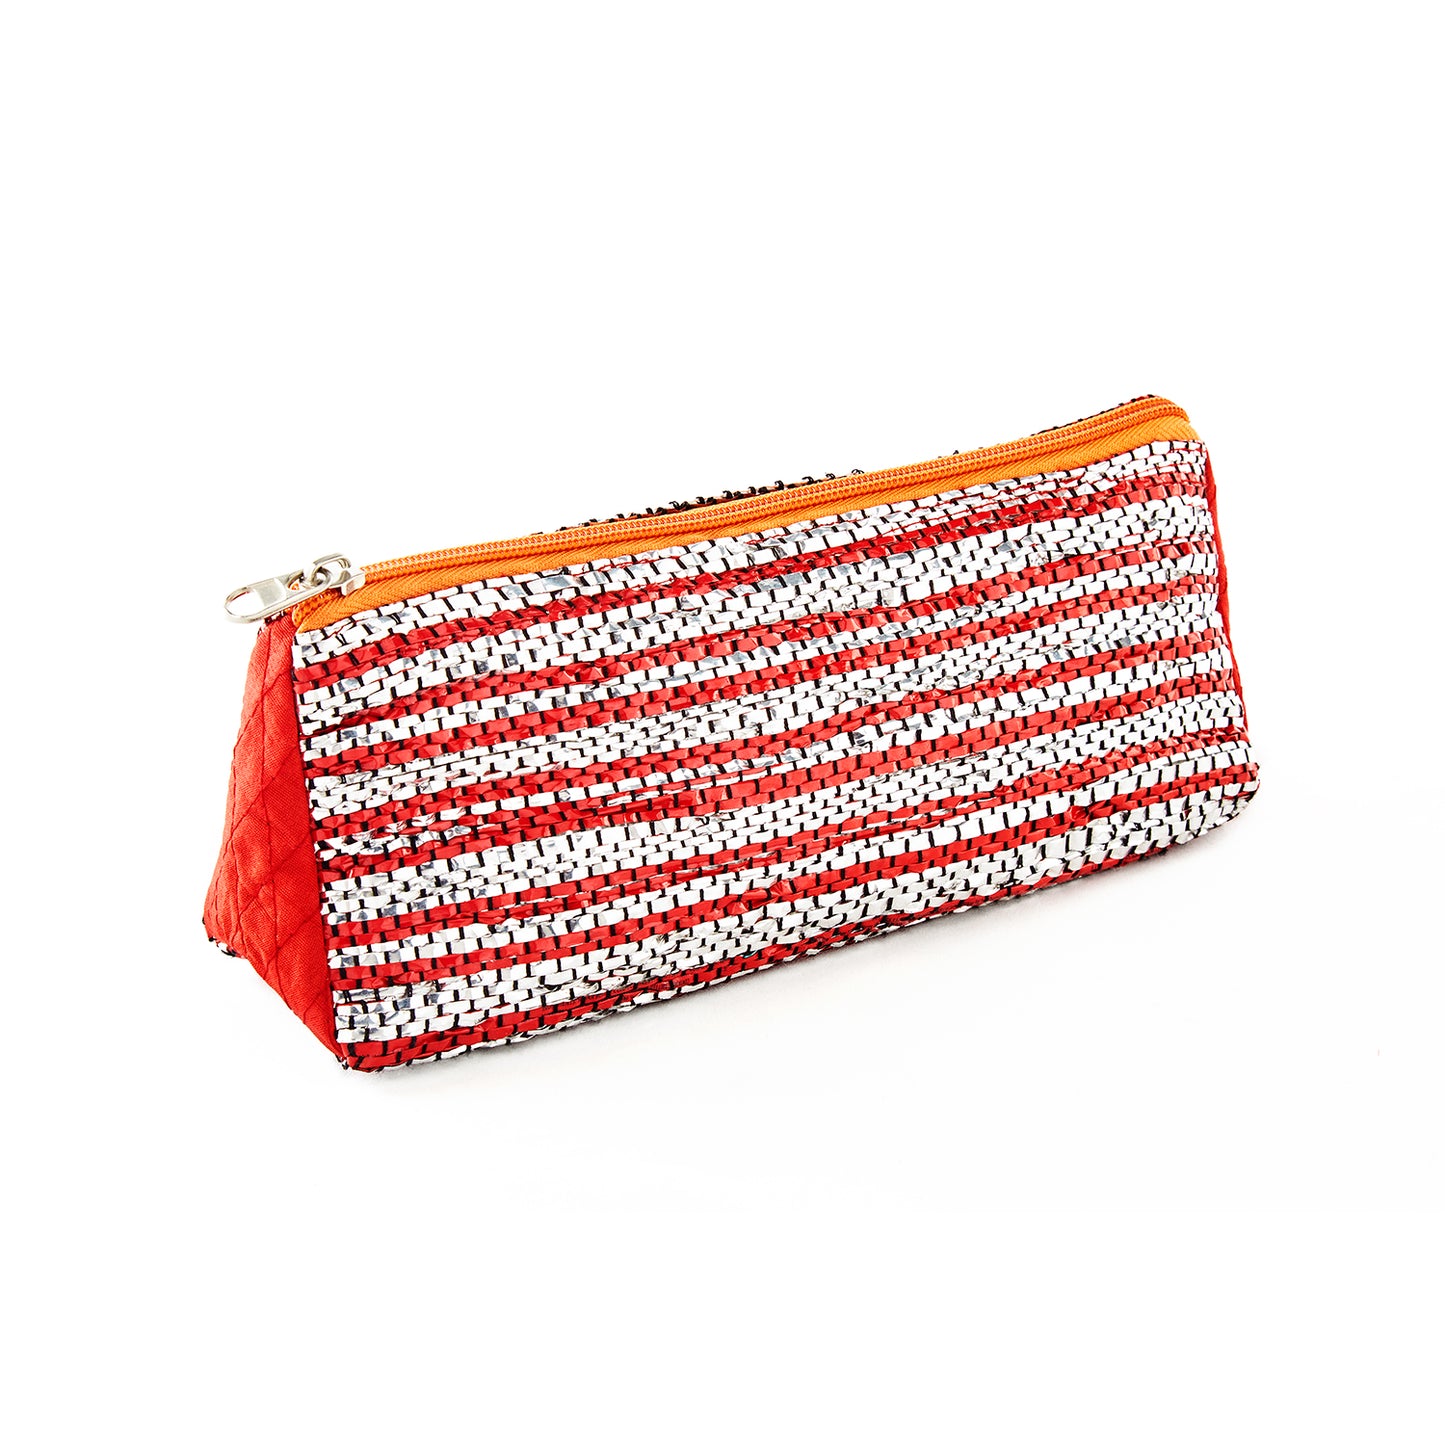 Red & Silver Recycled Plastic Pencil Pouch (MLP Plastic)